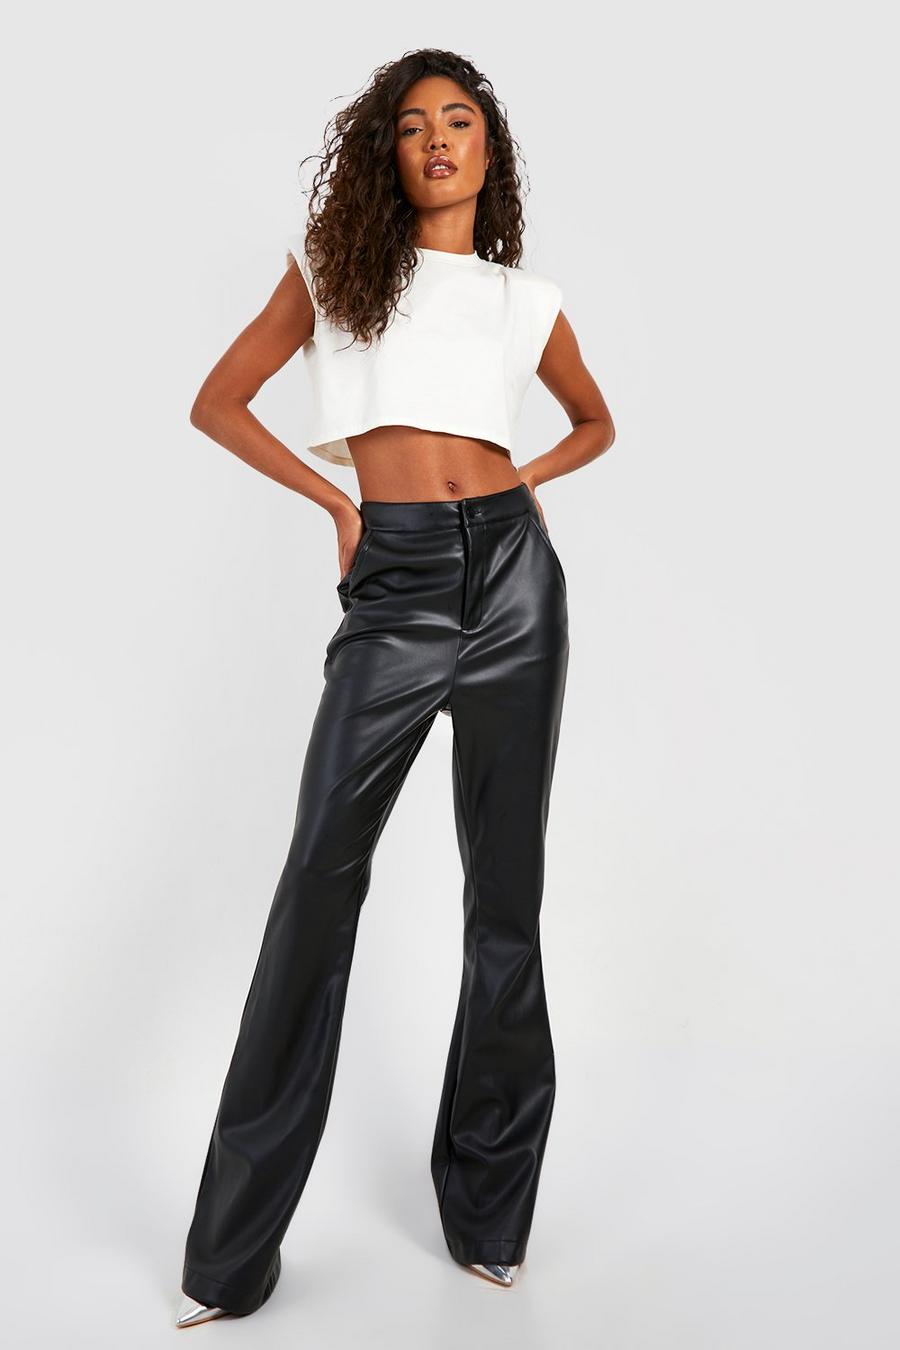 Leather Look Trousers, Faux Leather Leggings